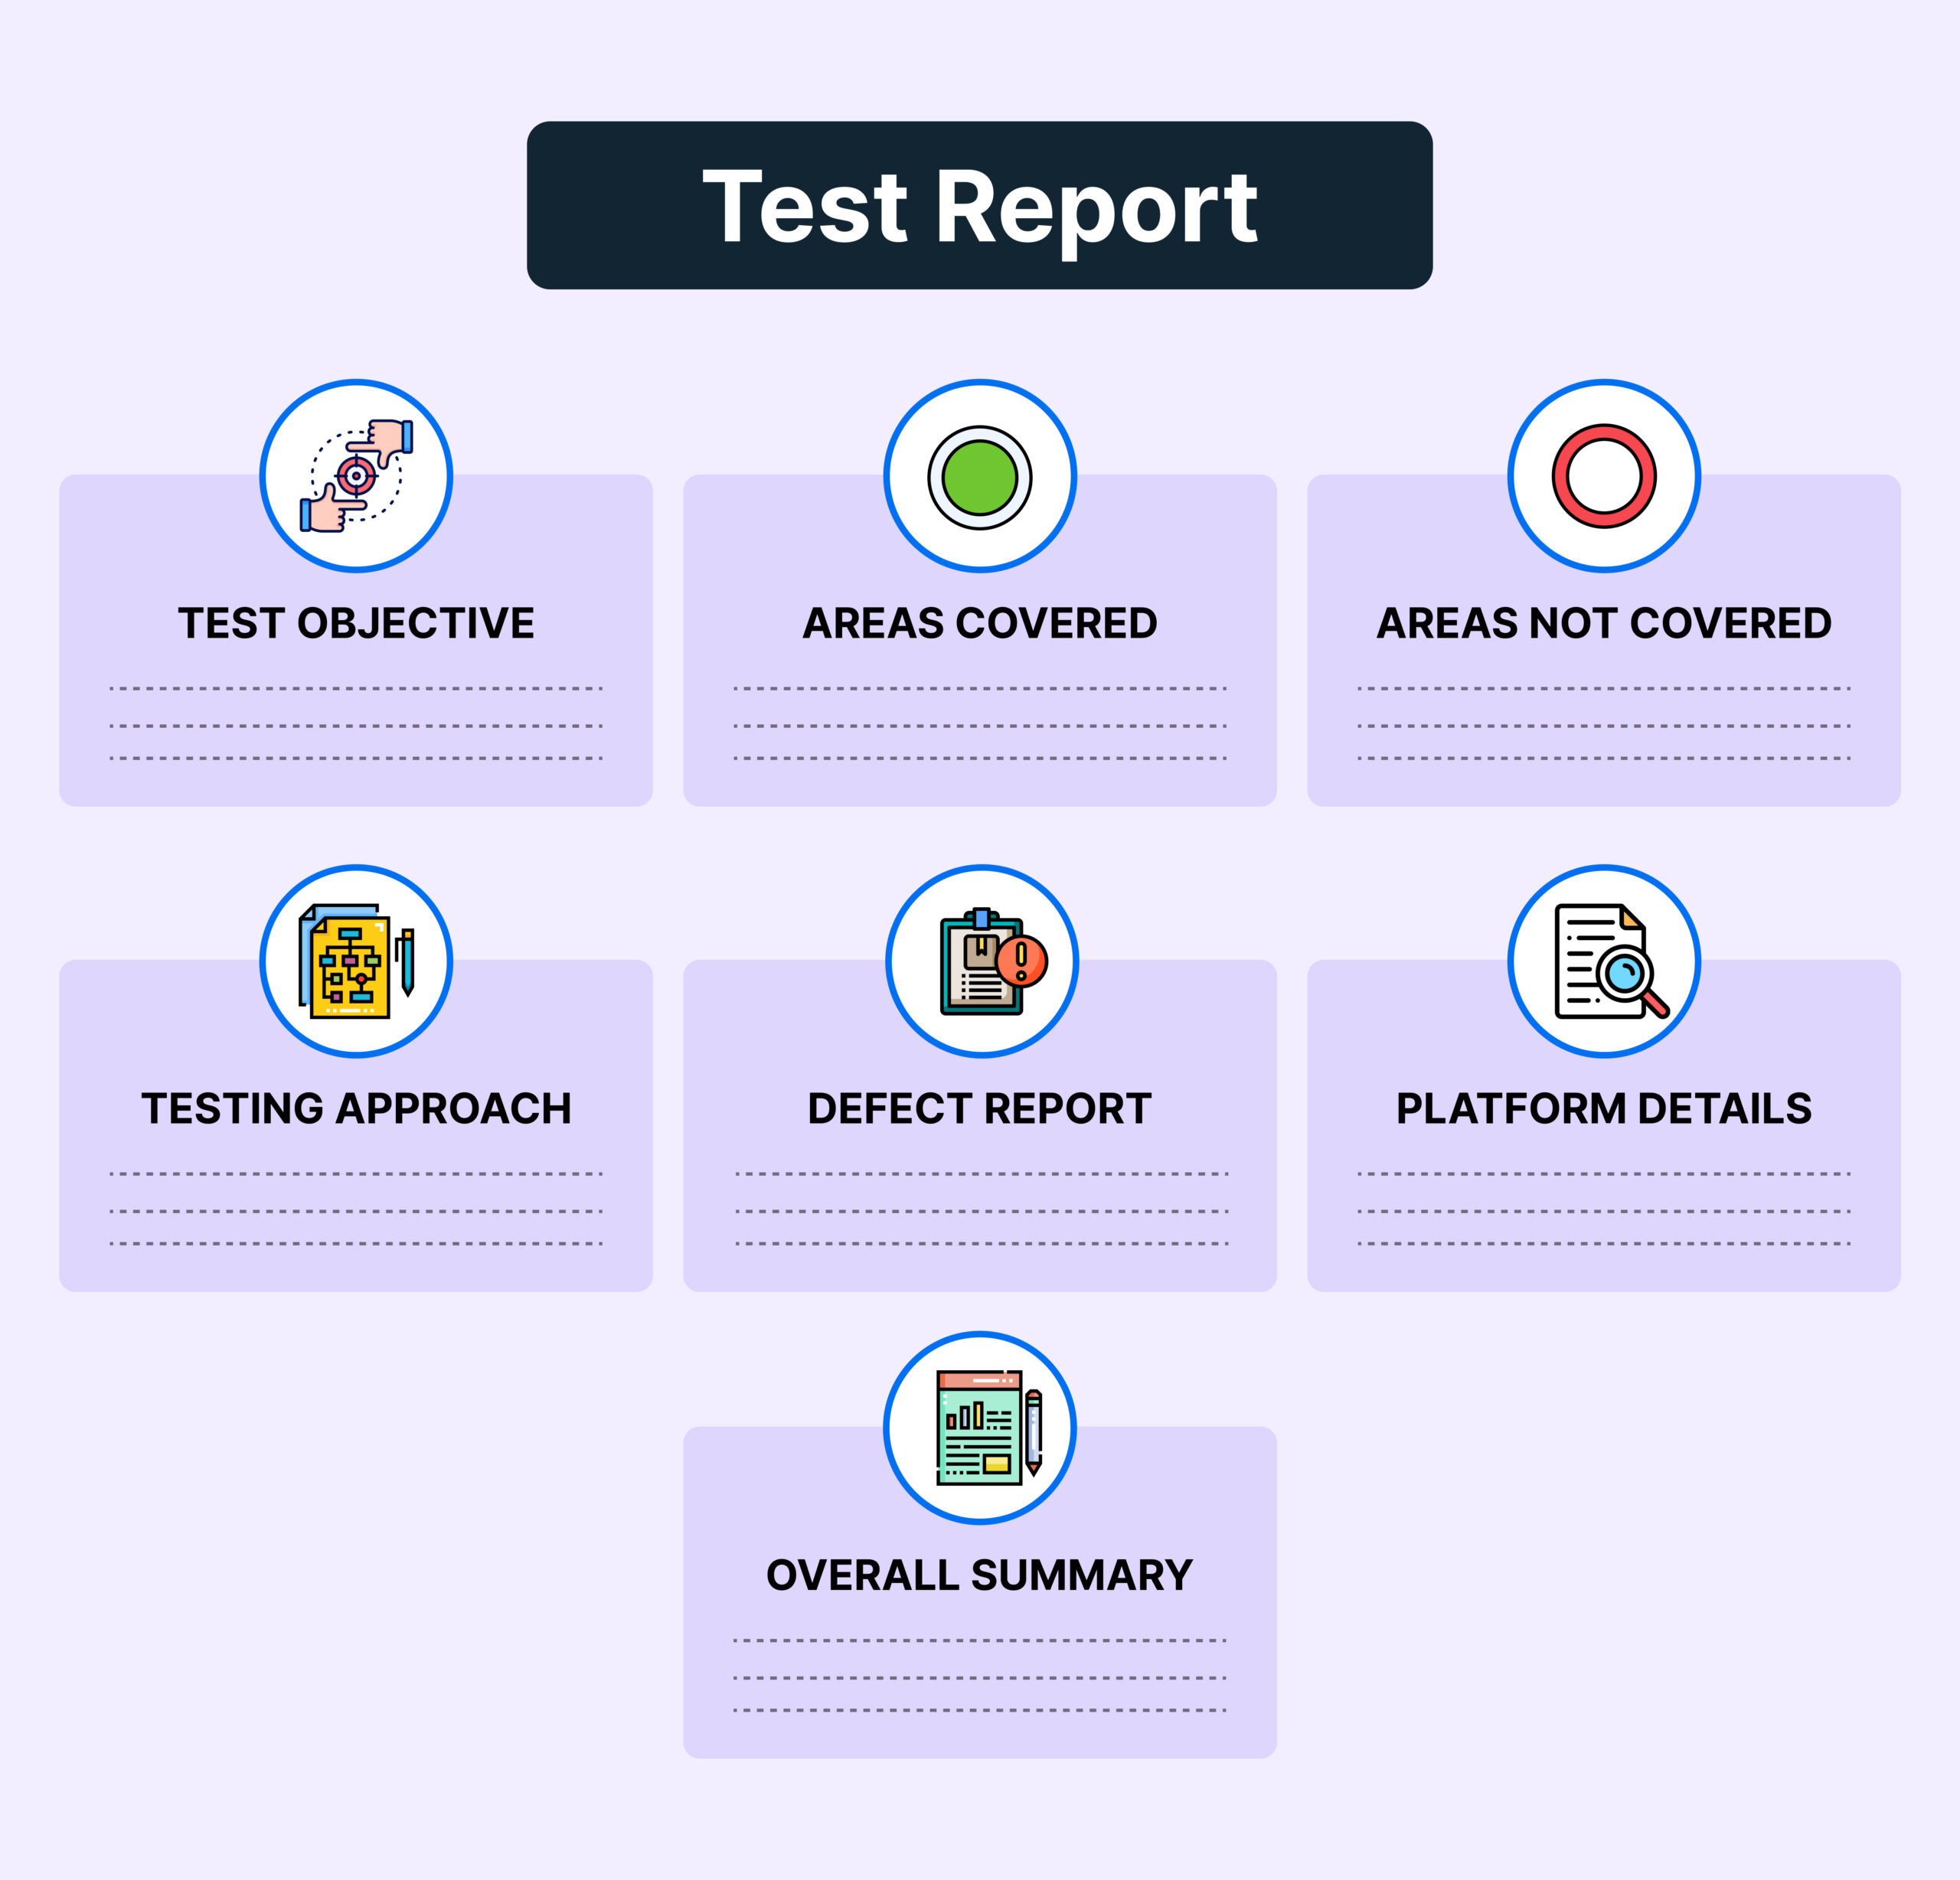 Components of Test Report